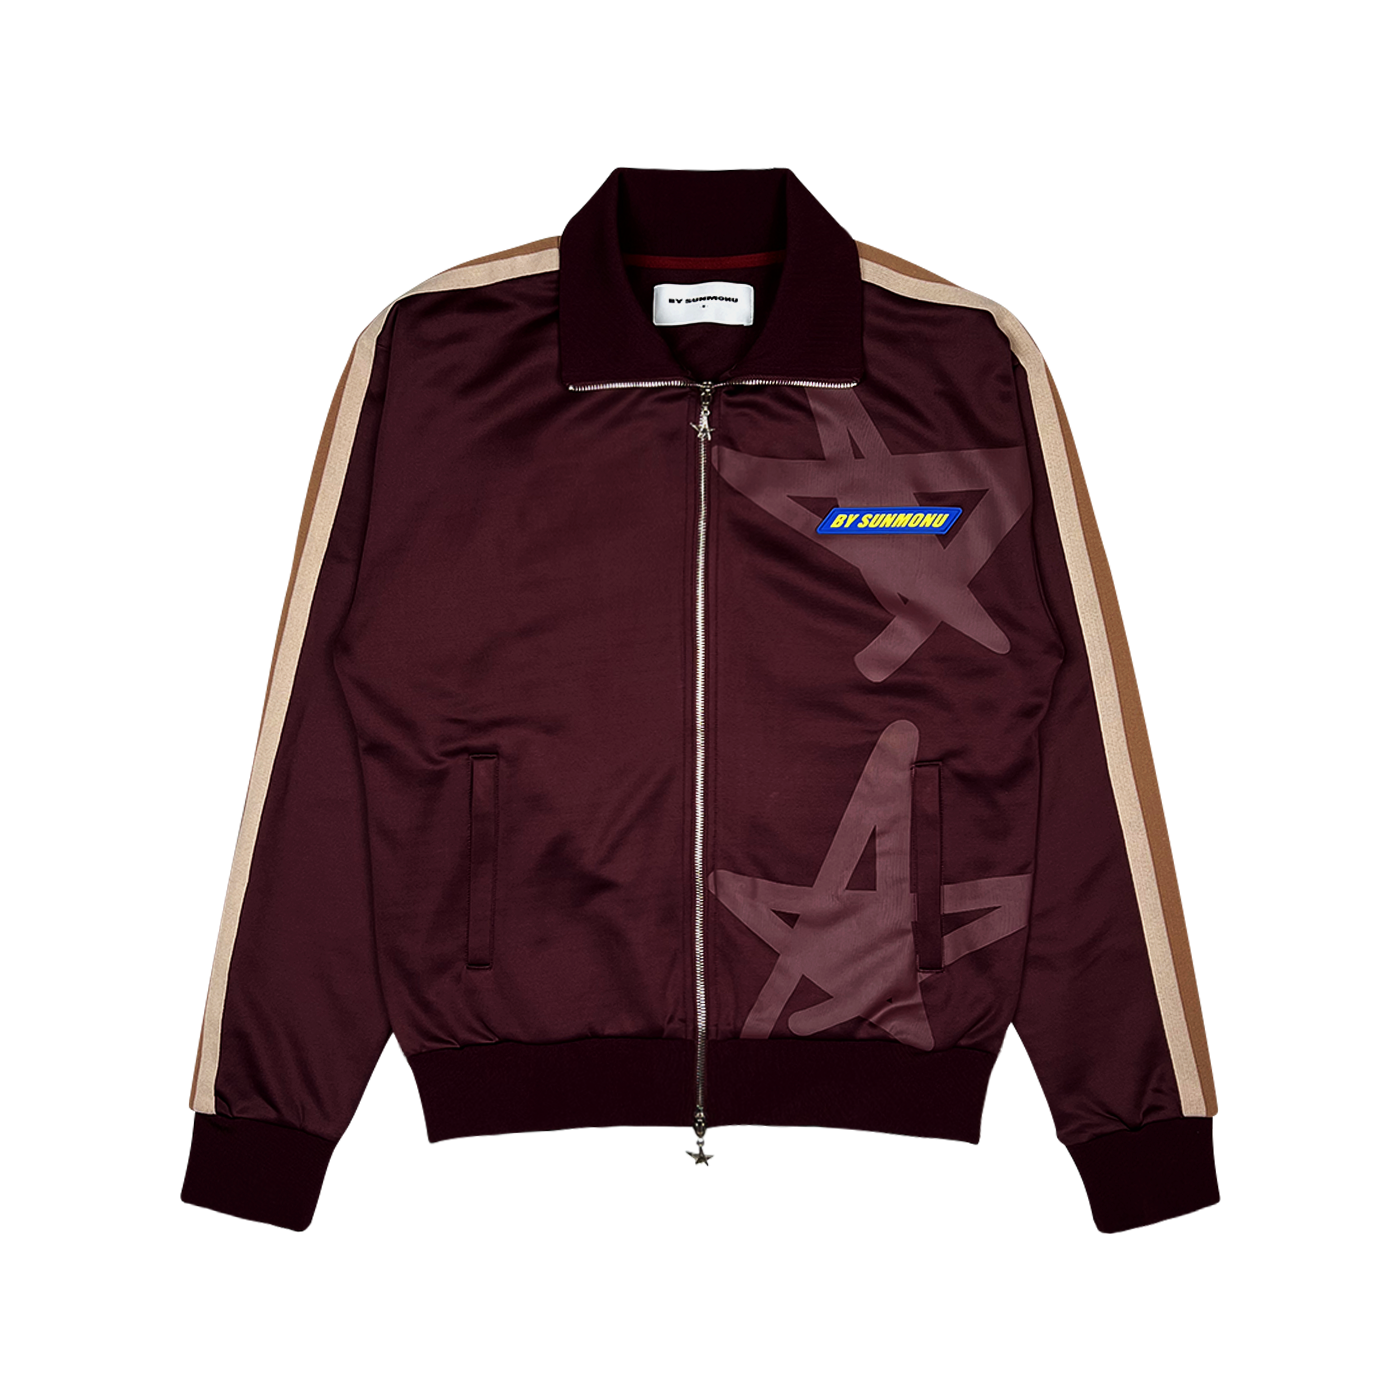 Uptown Track Jacket - Bordeaux (Ships in 7-10 working days)